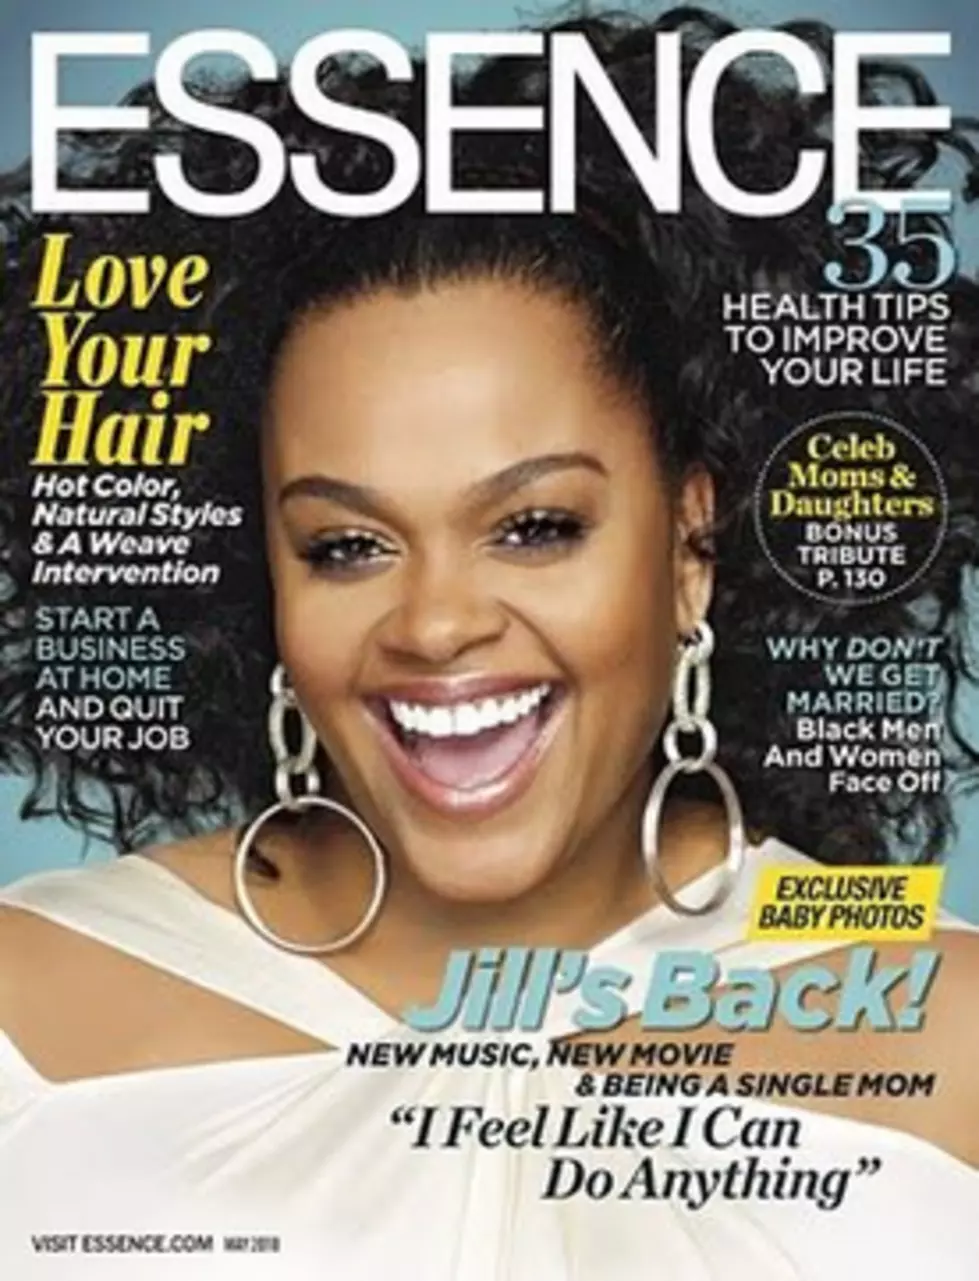 ESSENCE MAGAZINE IS 100% BLACK-OWNED ONCE AGAIN!